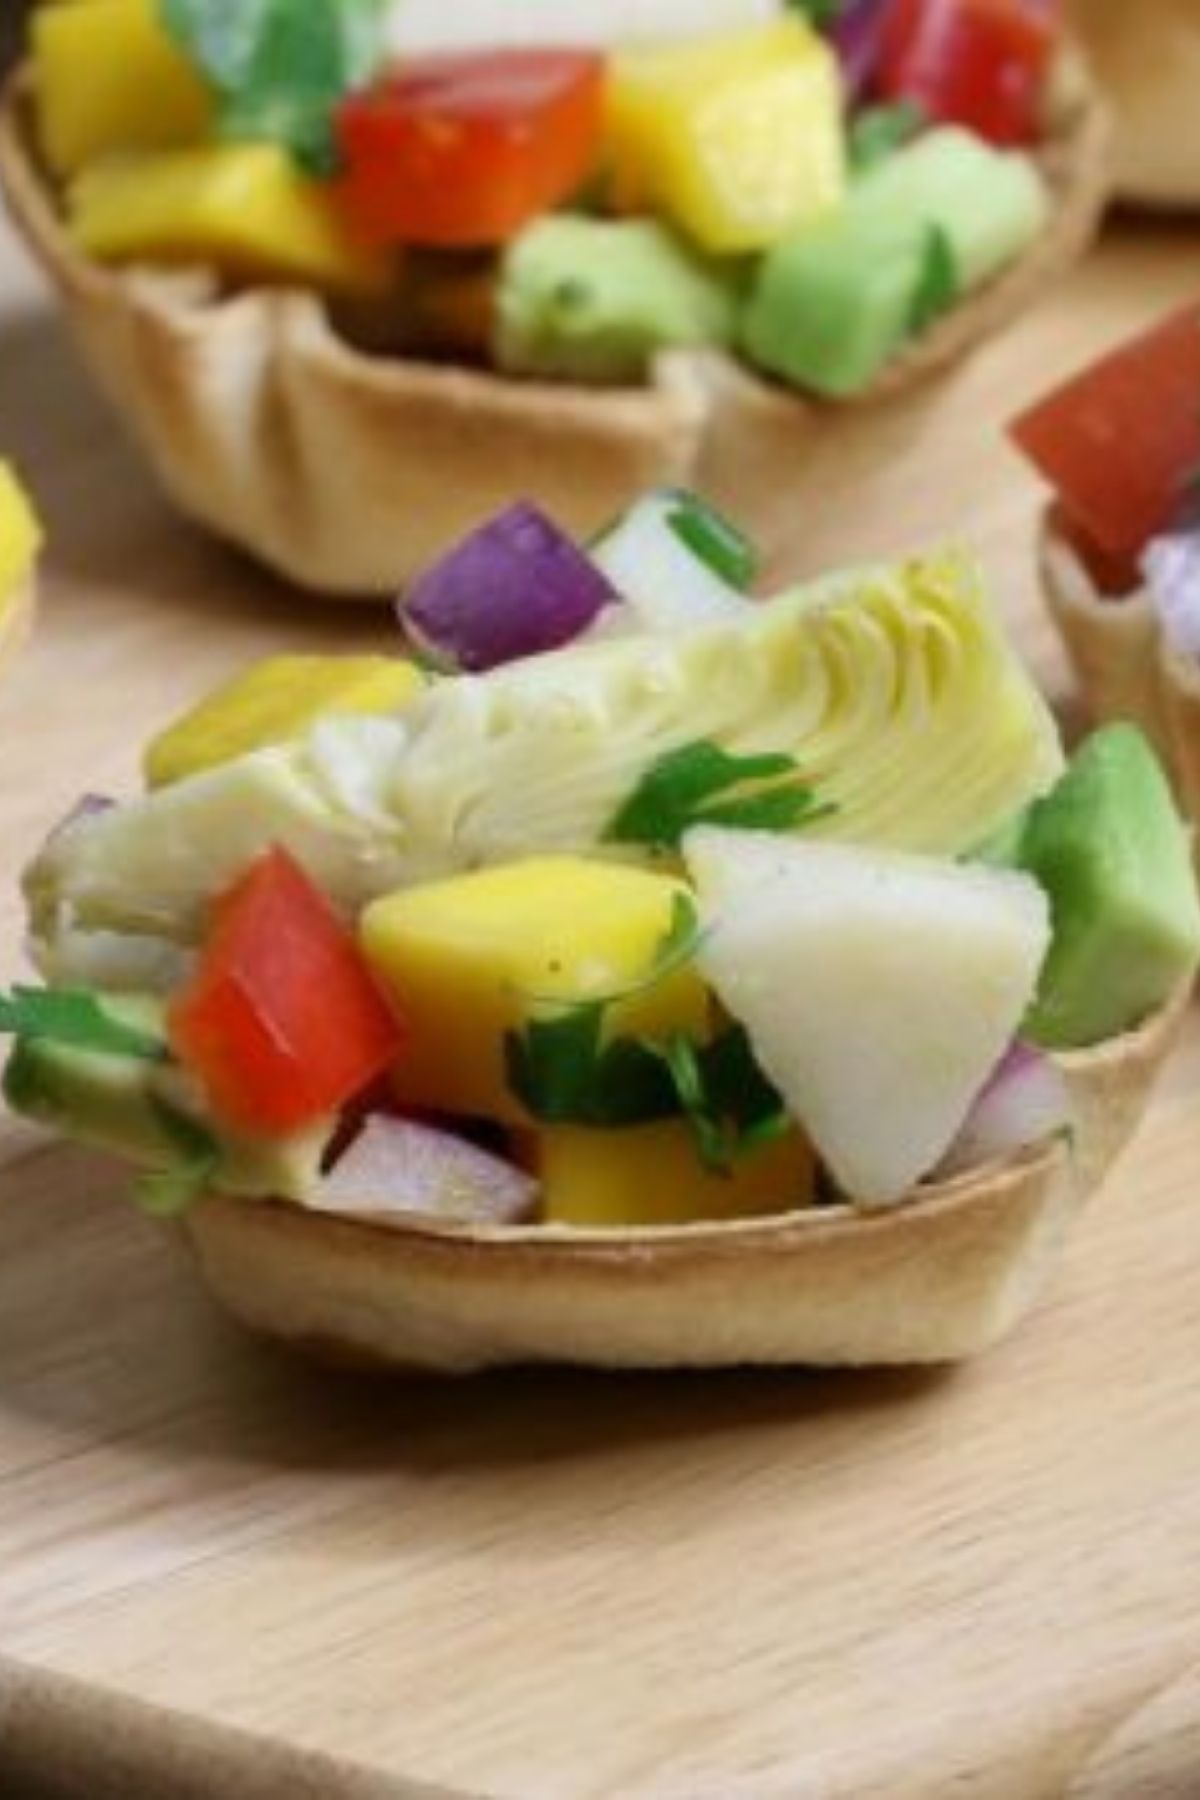 Hearts of Palm Ceviche Salad